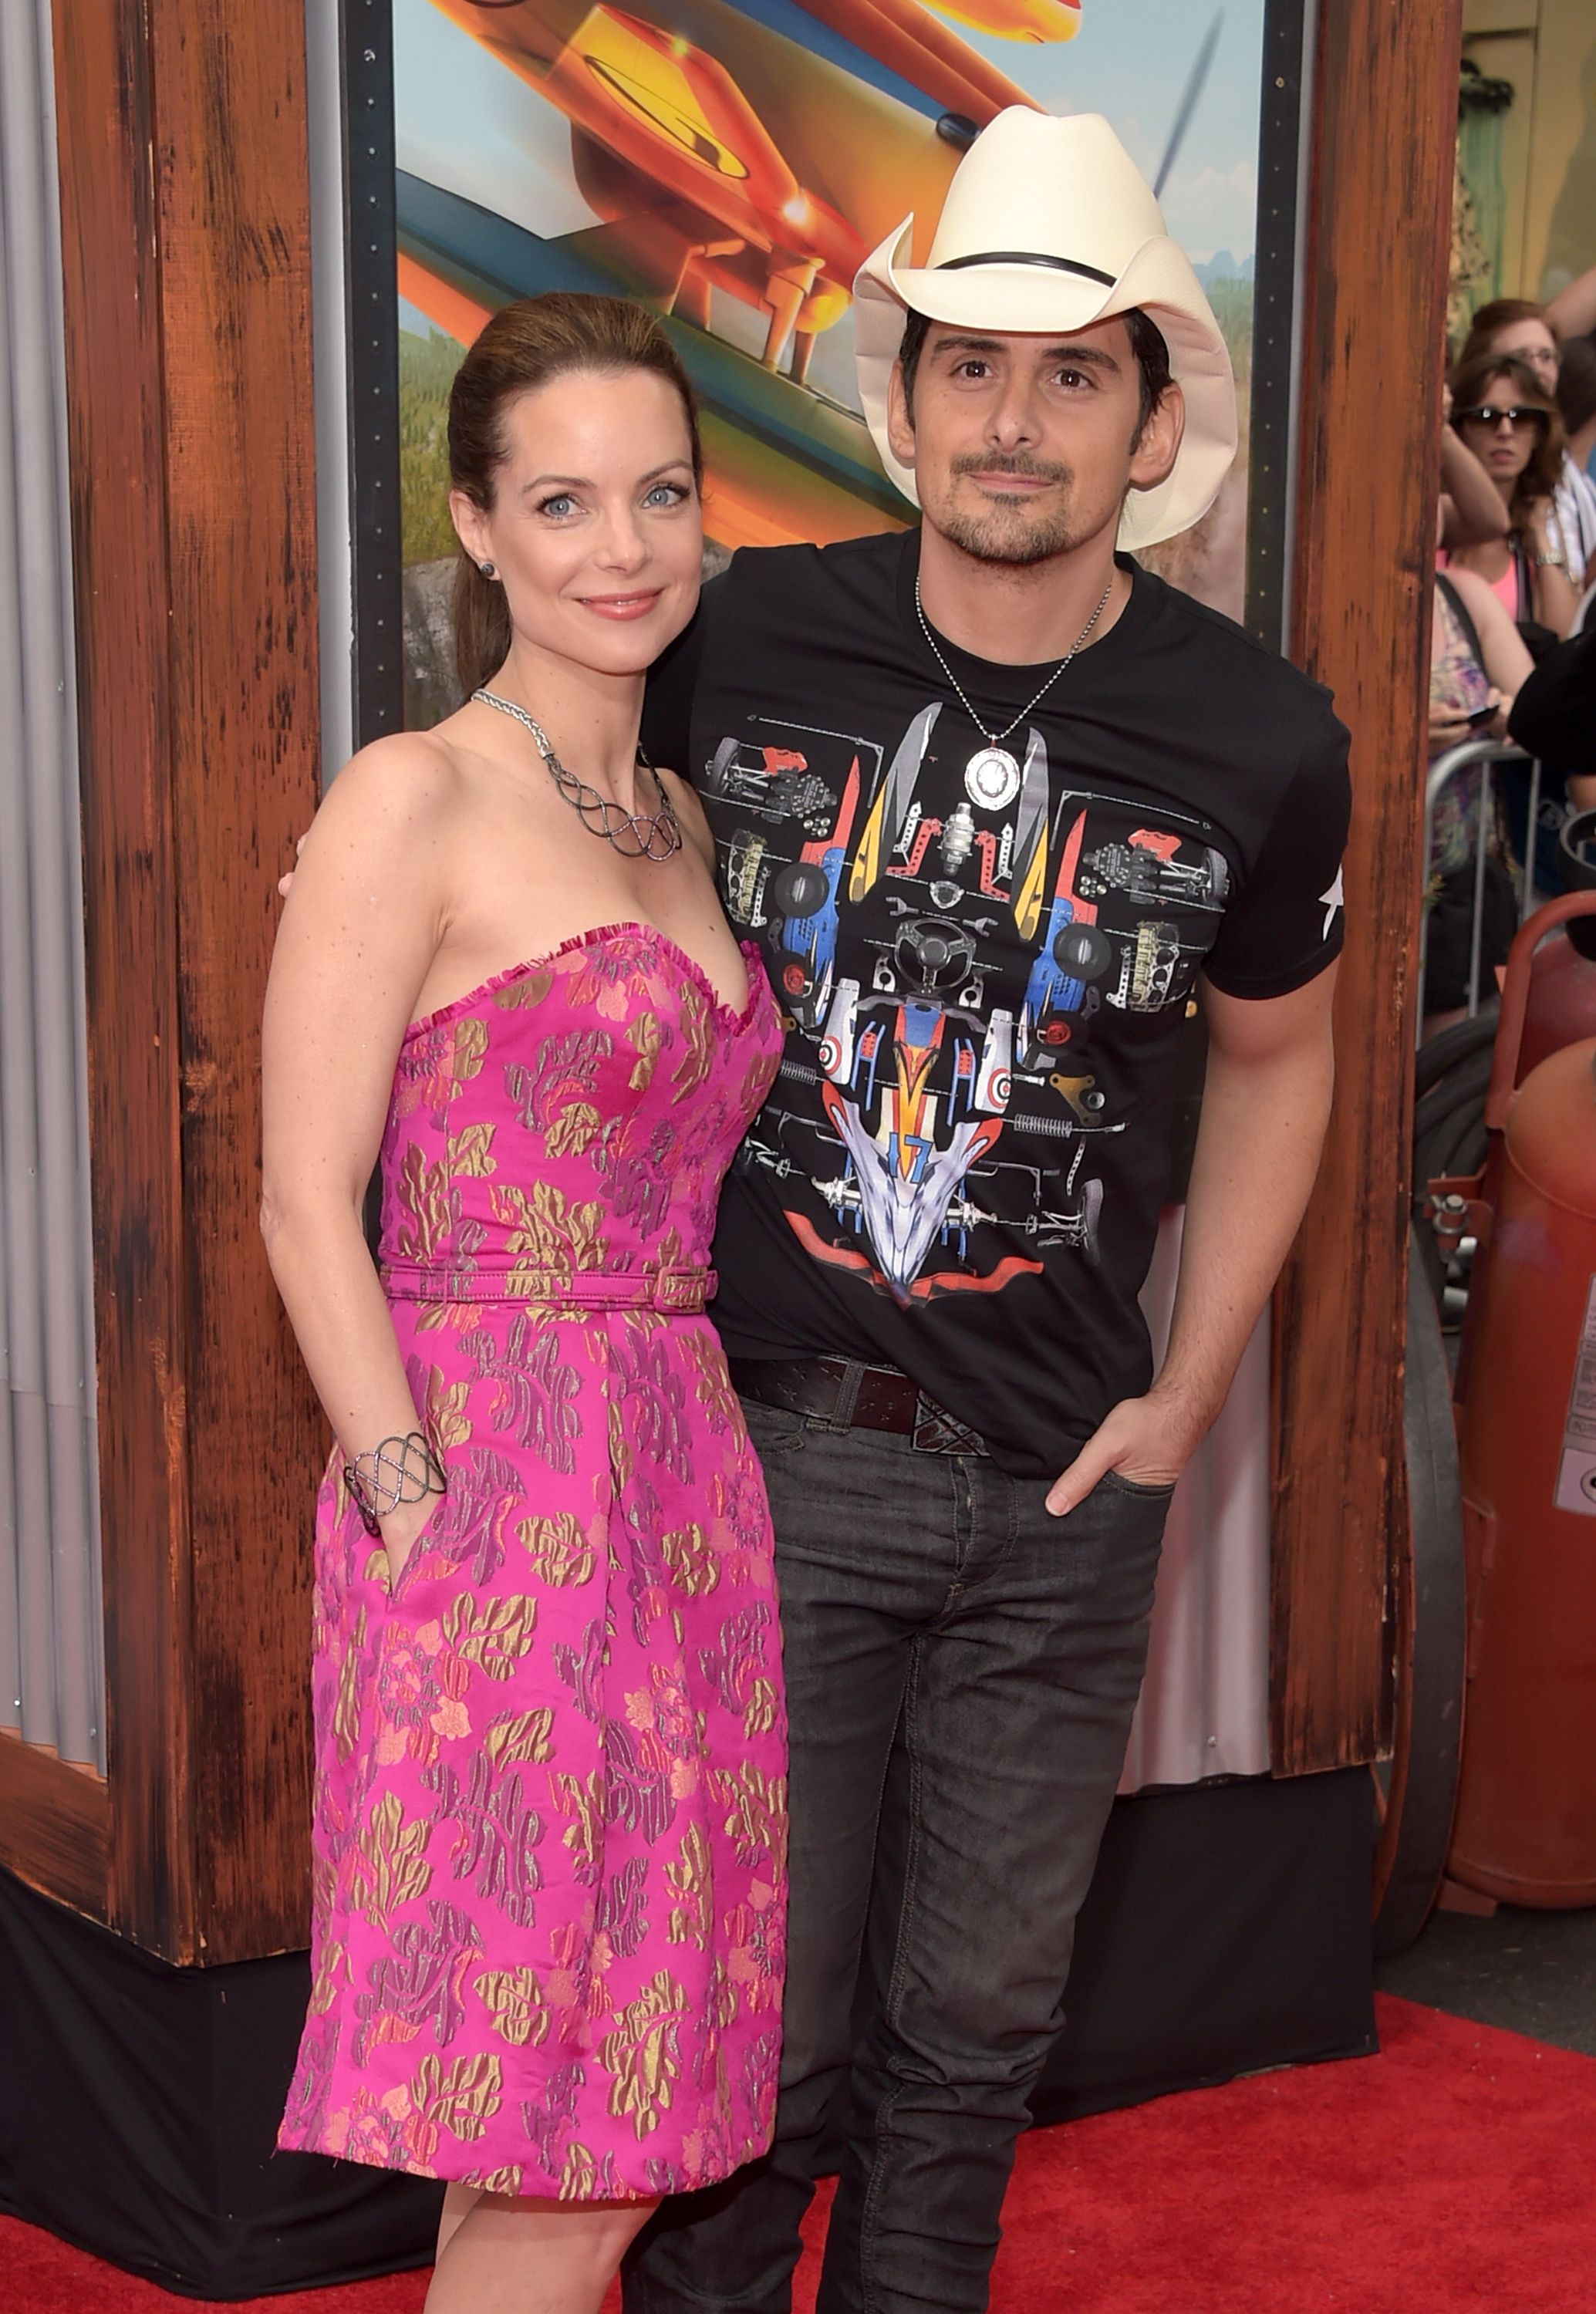 Brad Paisleys Love Story With Wife Kimberly Williams Is Adorable picture